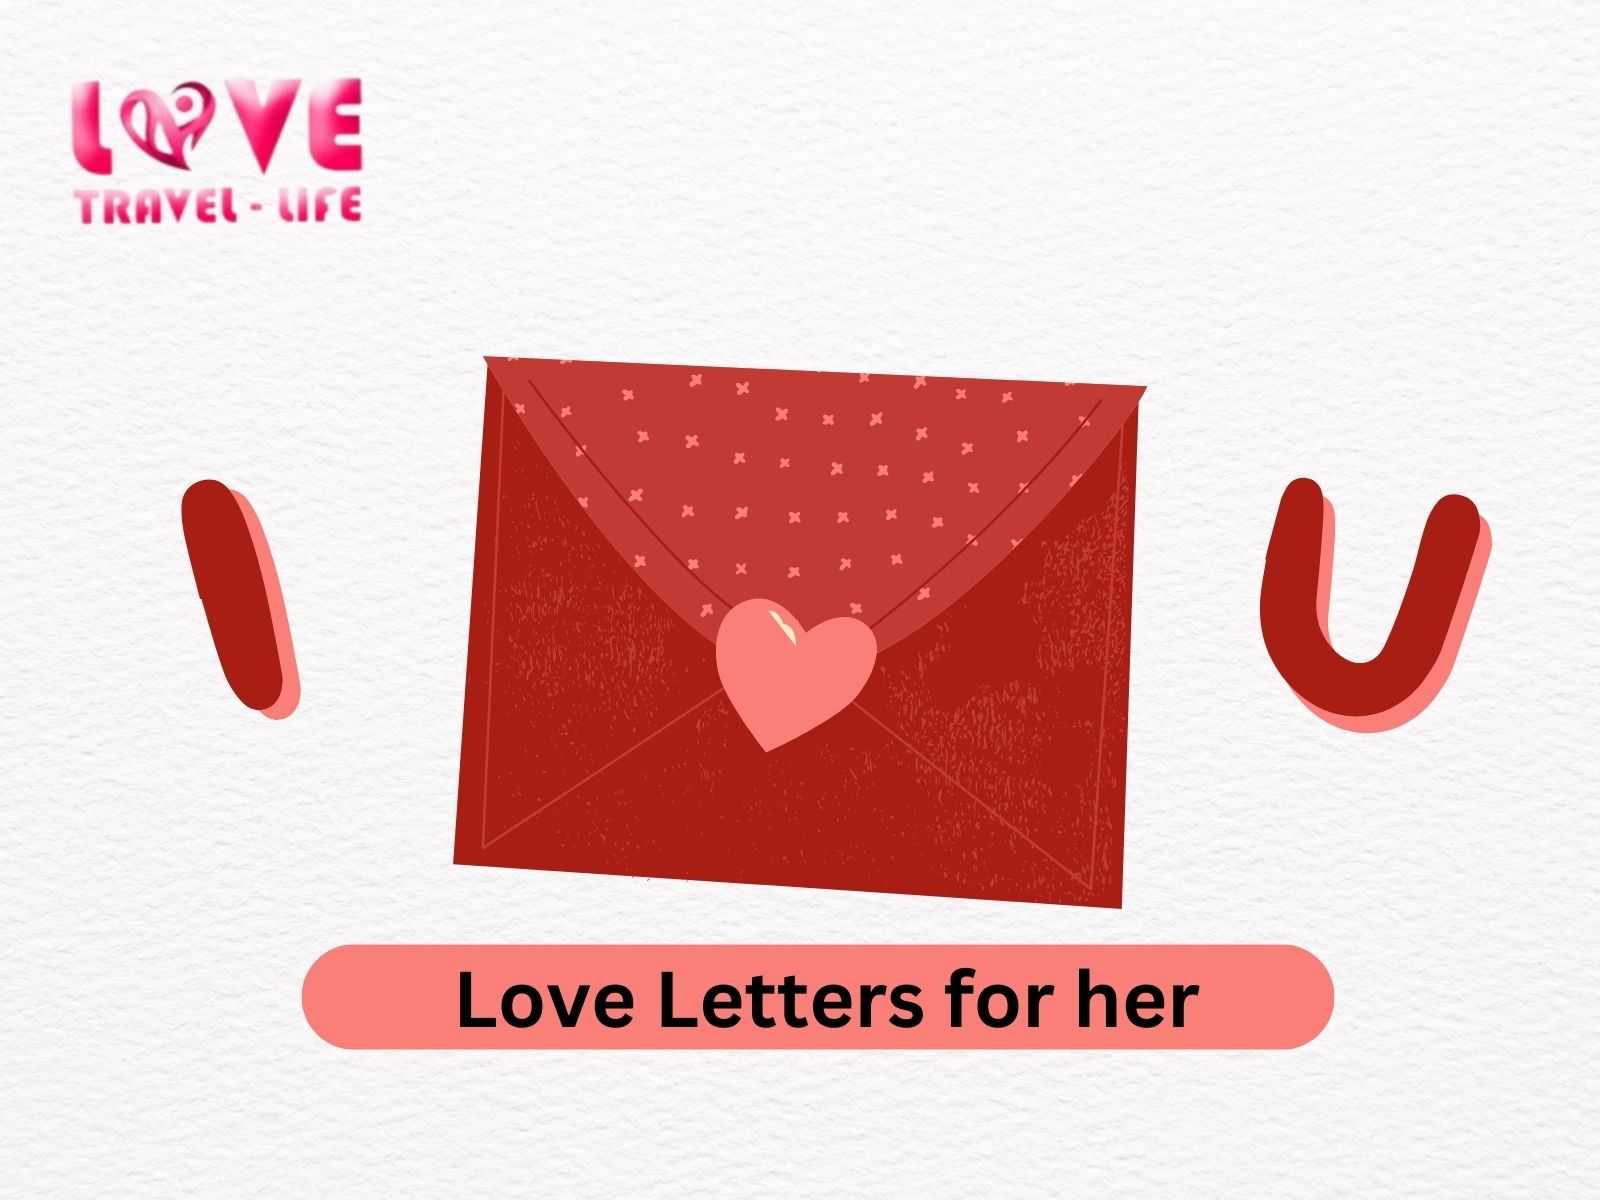 Expressing Affection: Crafting Heartfelt Love Letters for Her – Heartfelt Expressions: Crafting Love Letters for Her That Last a Lifetime